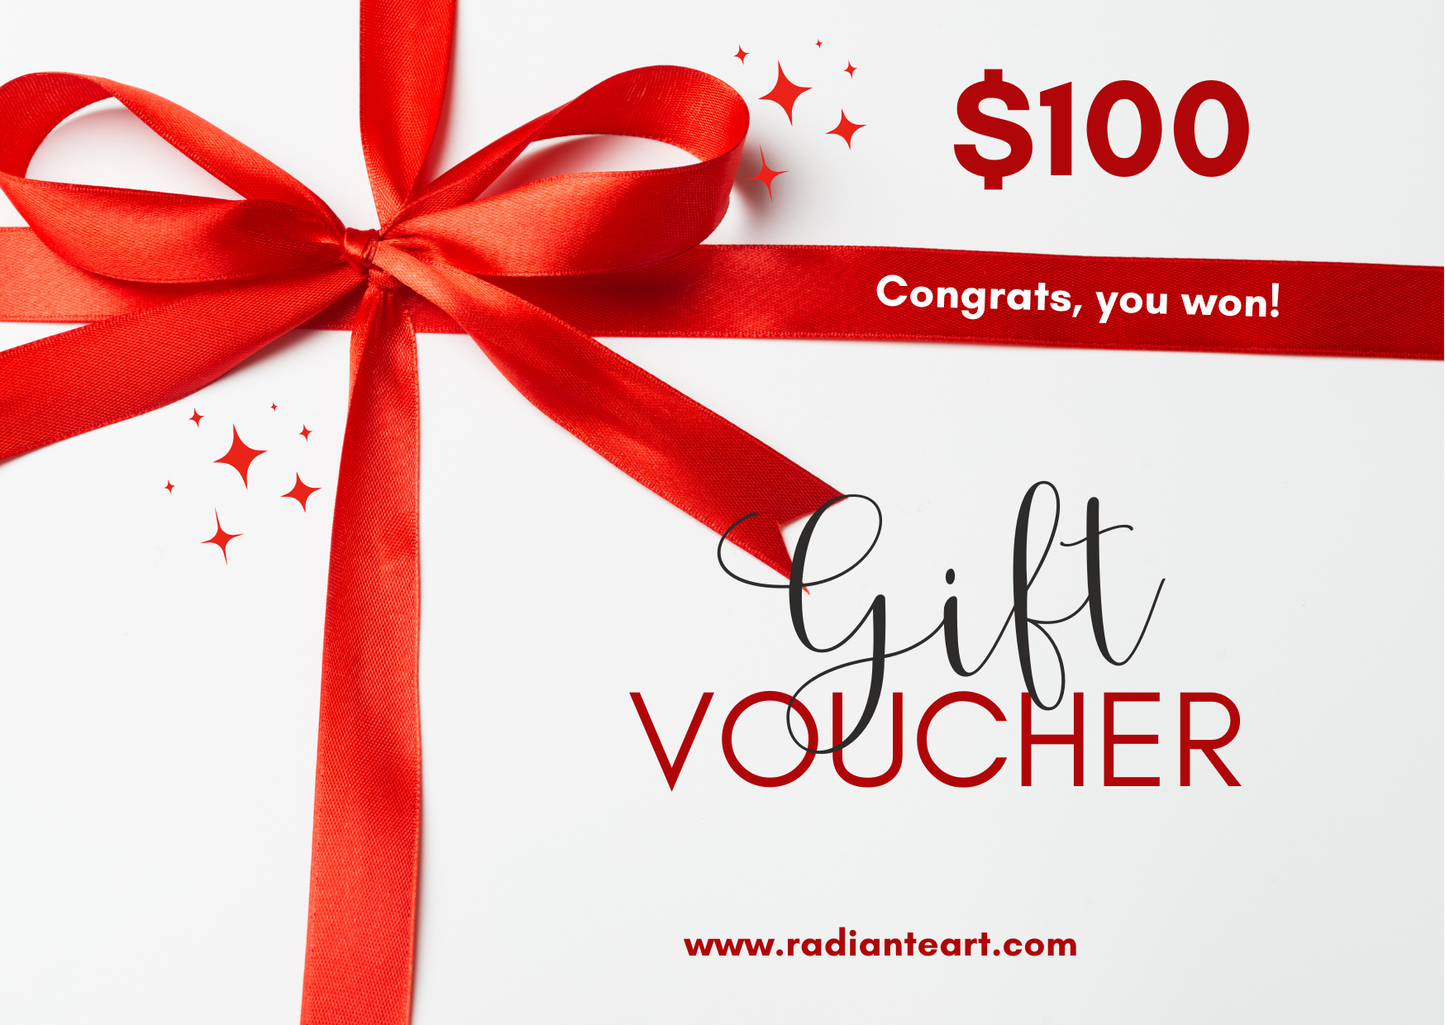 YOU RECEIVED THIS GIFT CARD FROM RADIANTE ART FOR US$ 100